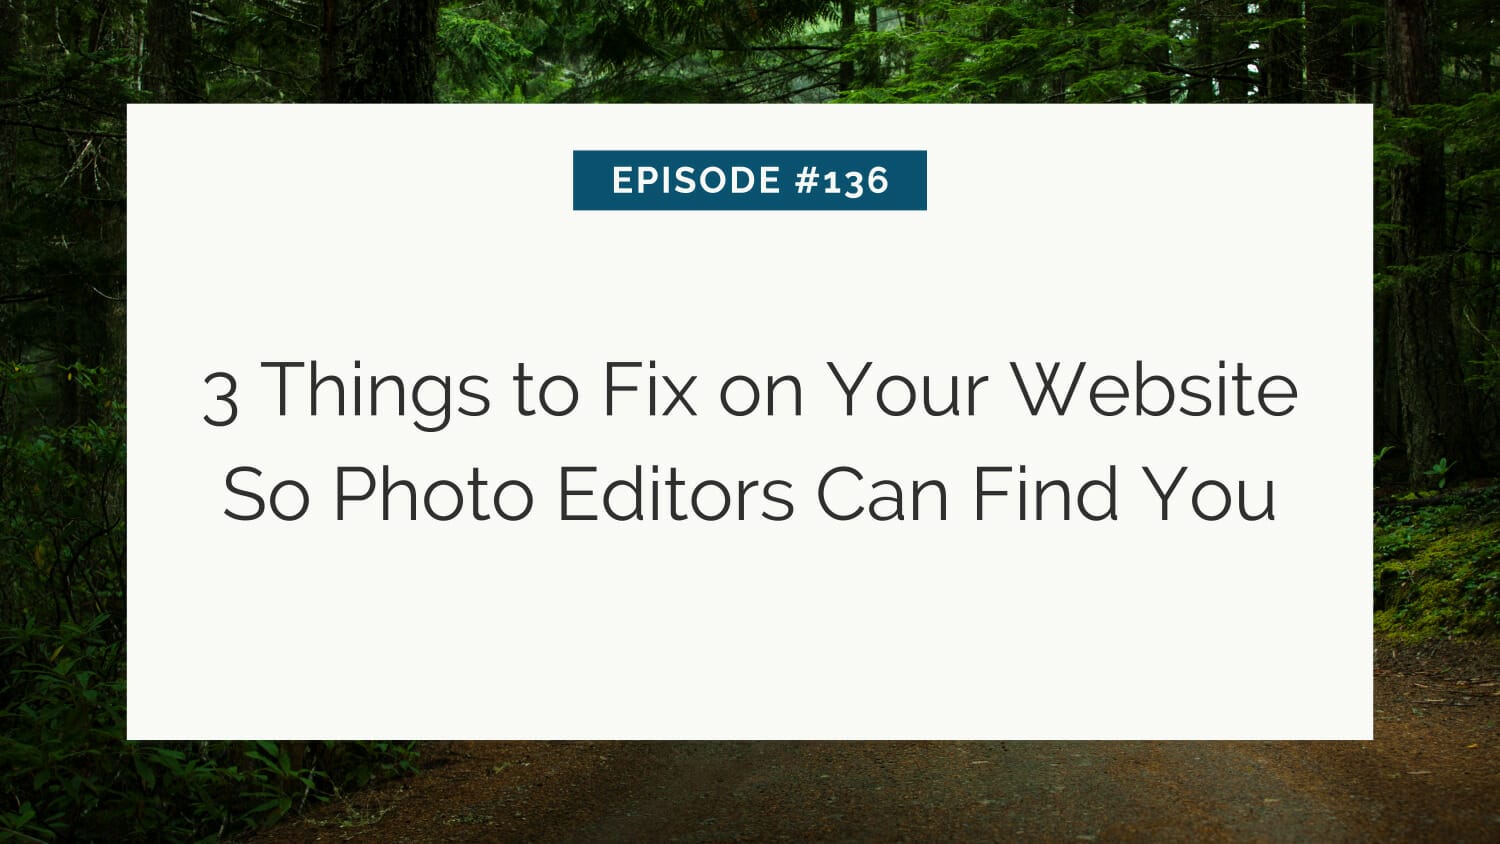 A presentation slide titled "episode #136: 3 things to fix on your website so photo editors can find you" set against a forest background.